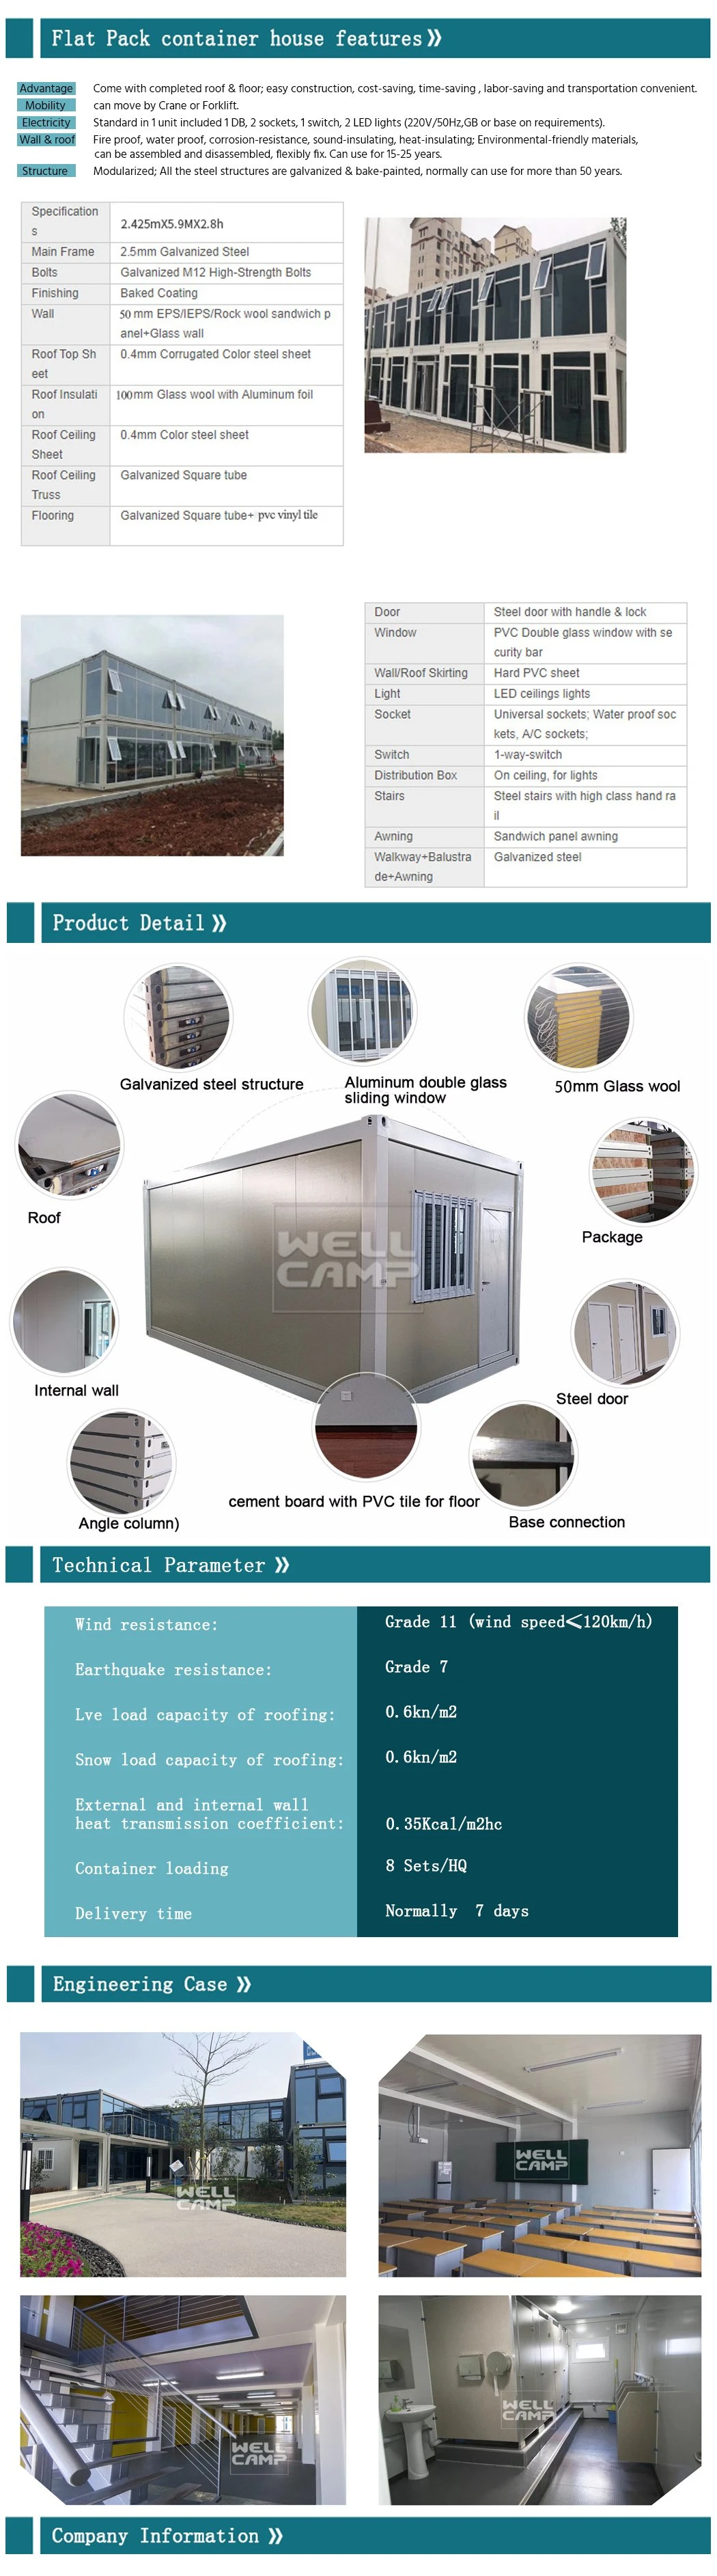 Low Cost Prefabricated Flat Pack Container Hotel Outdoor Portable House Mobile Hotel Container Hoel